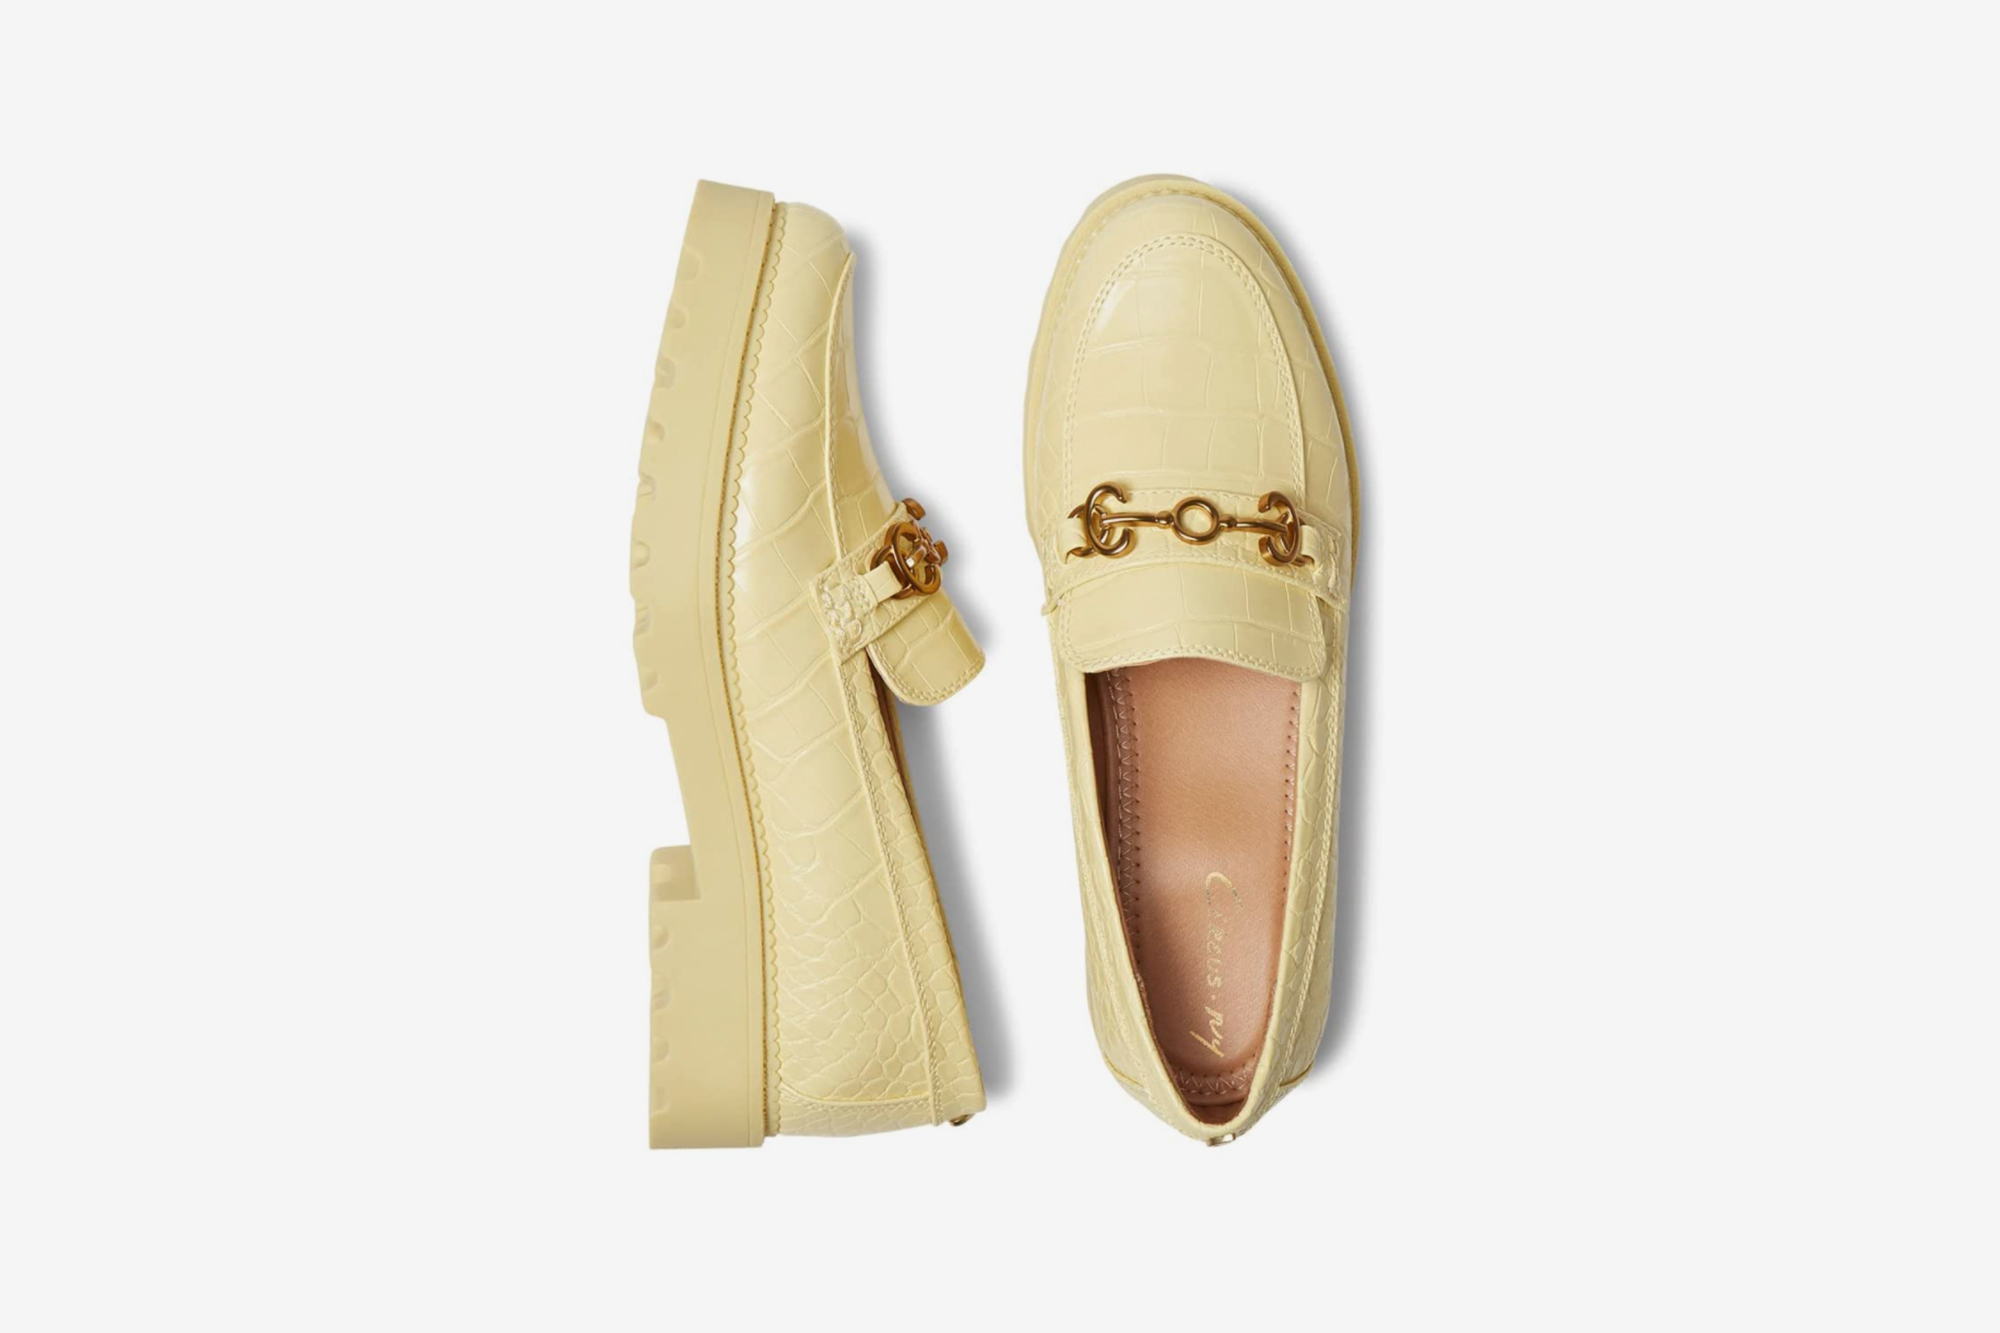 Sam Edelman Loafers Are the Star Shoes We'll Be Wearing All Spring